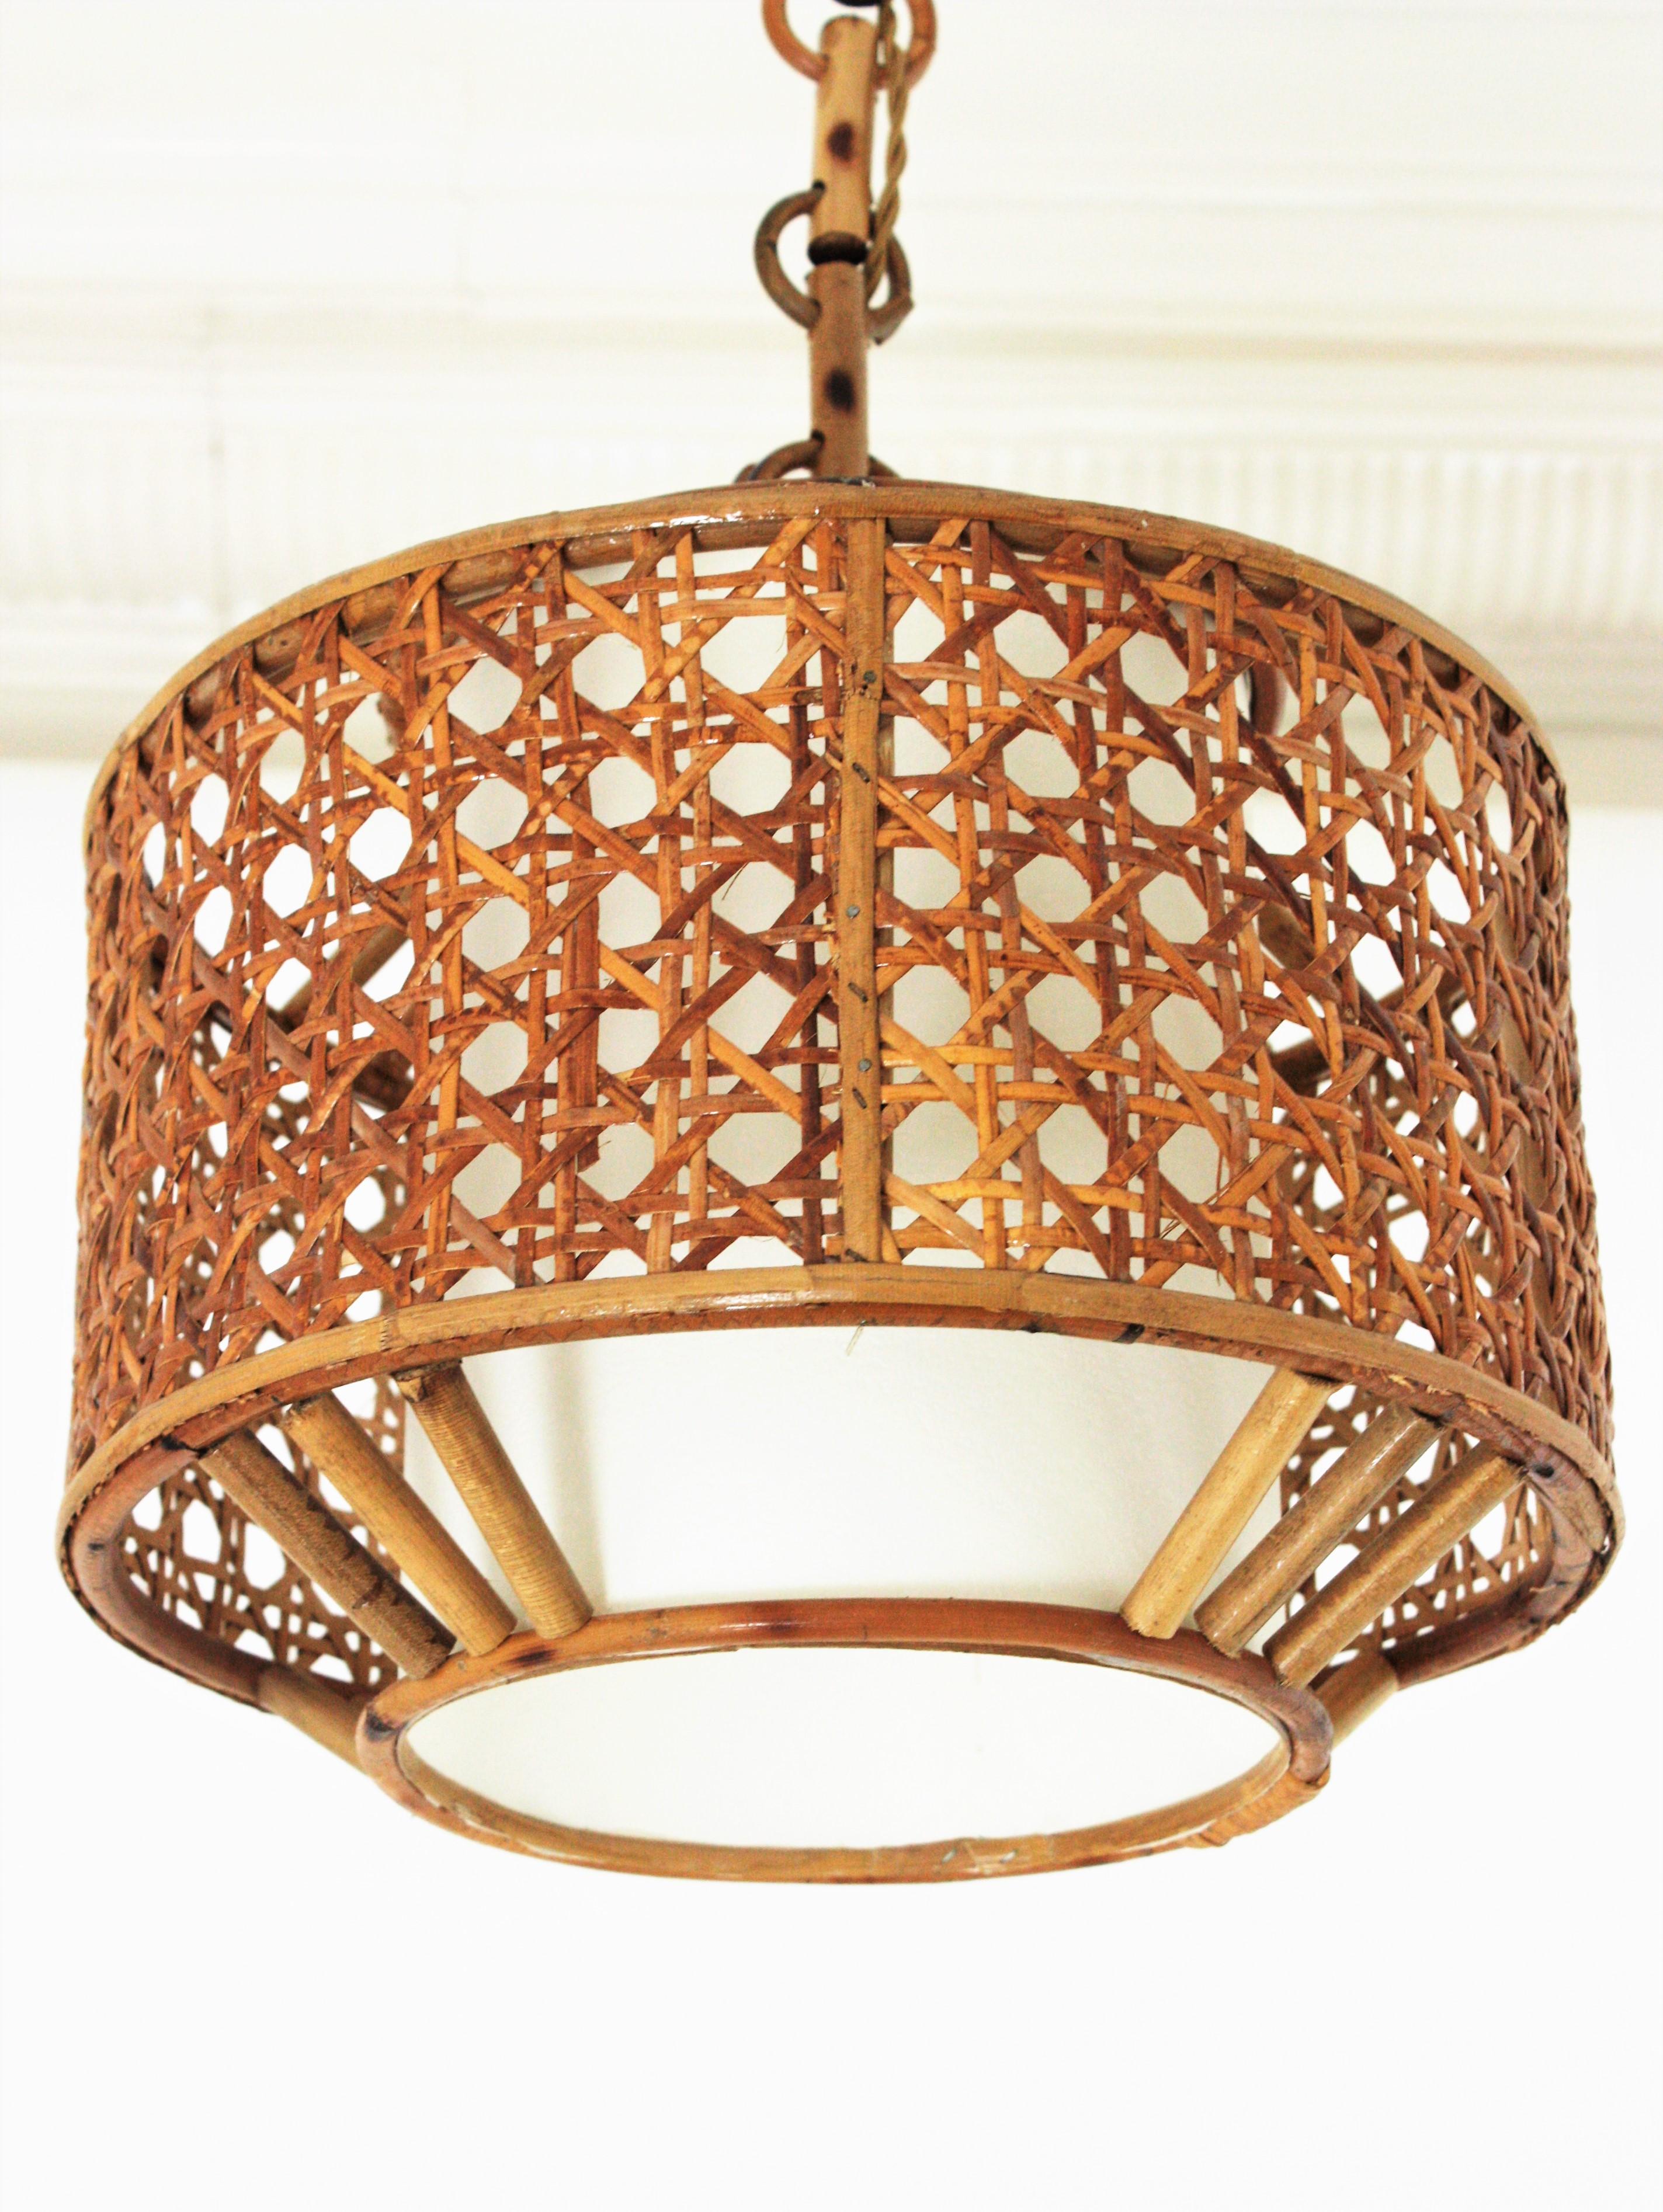 Bamboo Rattan and Wicker Weave Drum Pendant Light or Lantern  For Sale 1